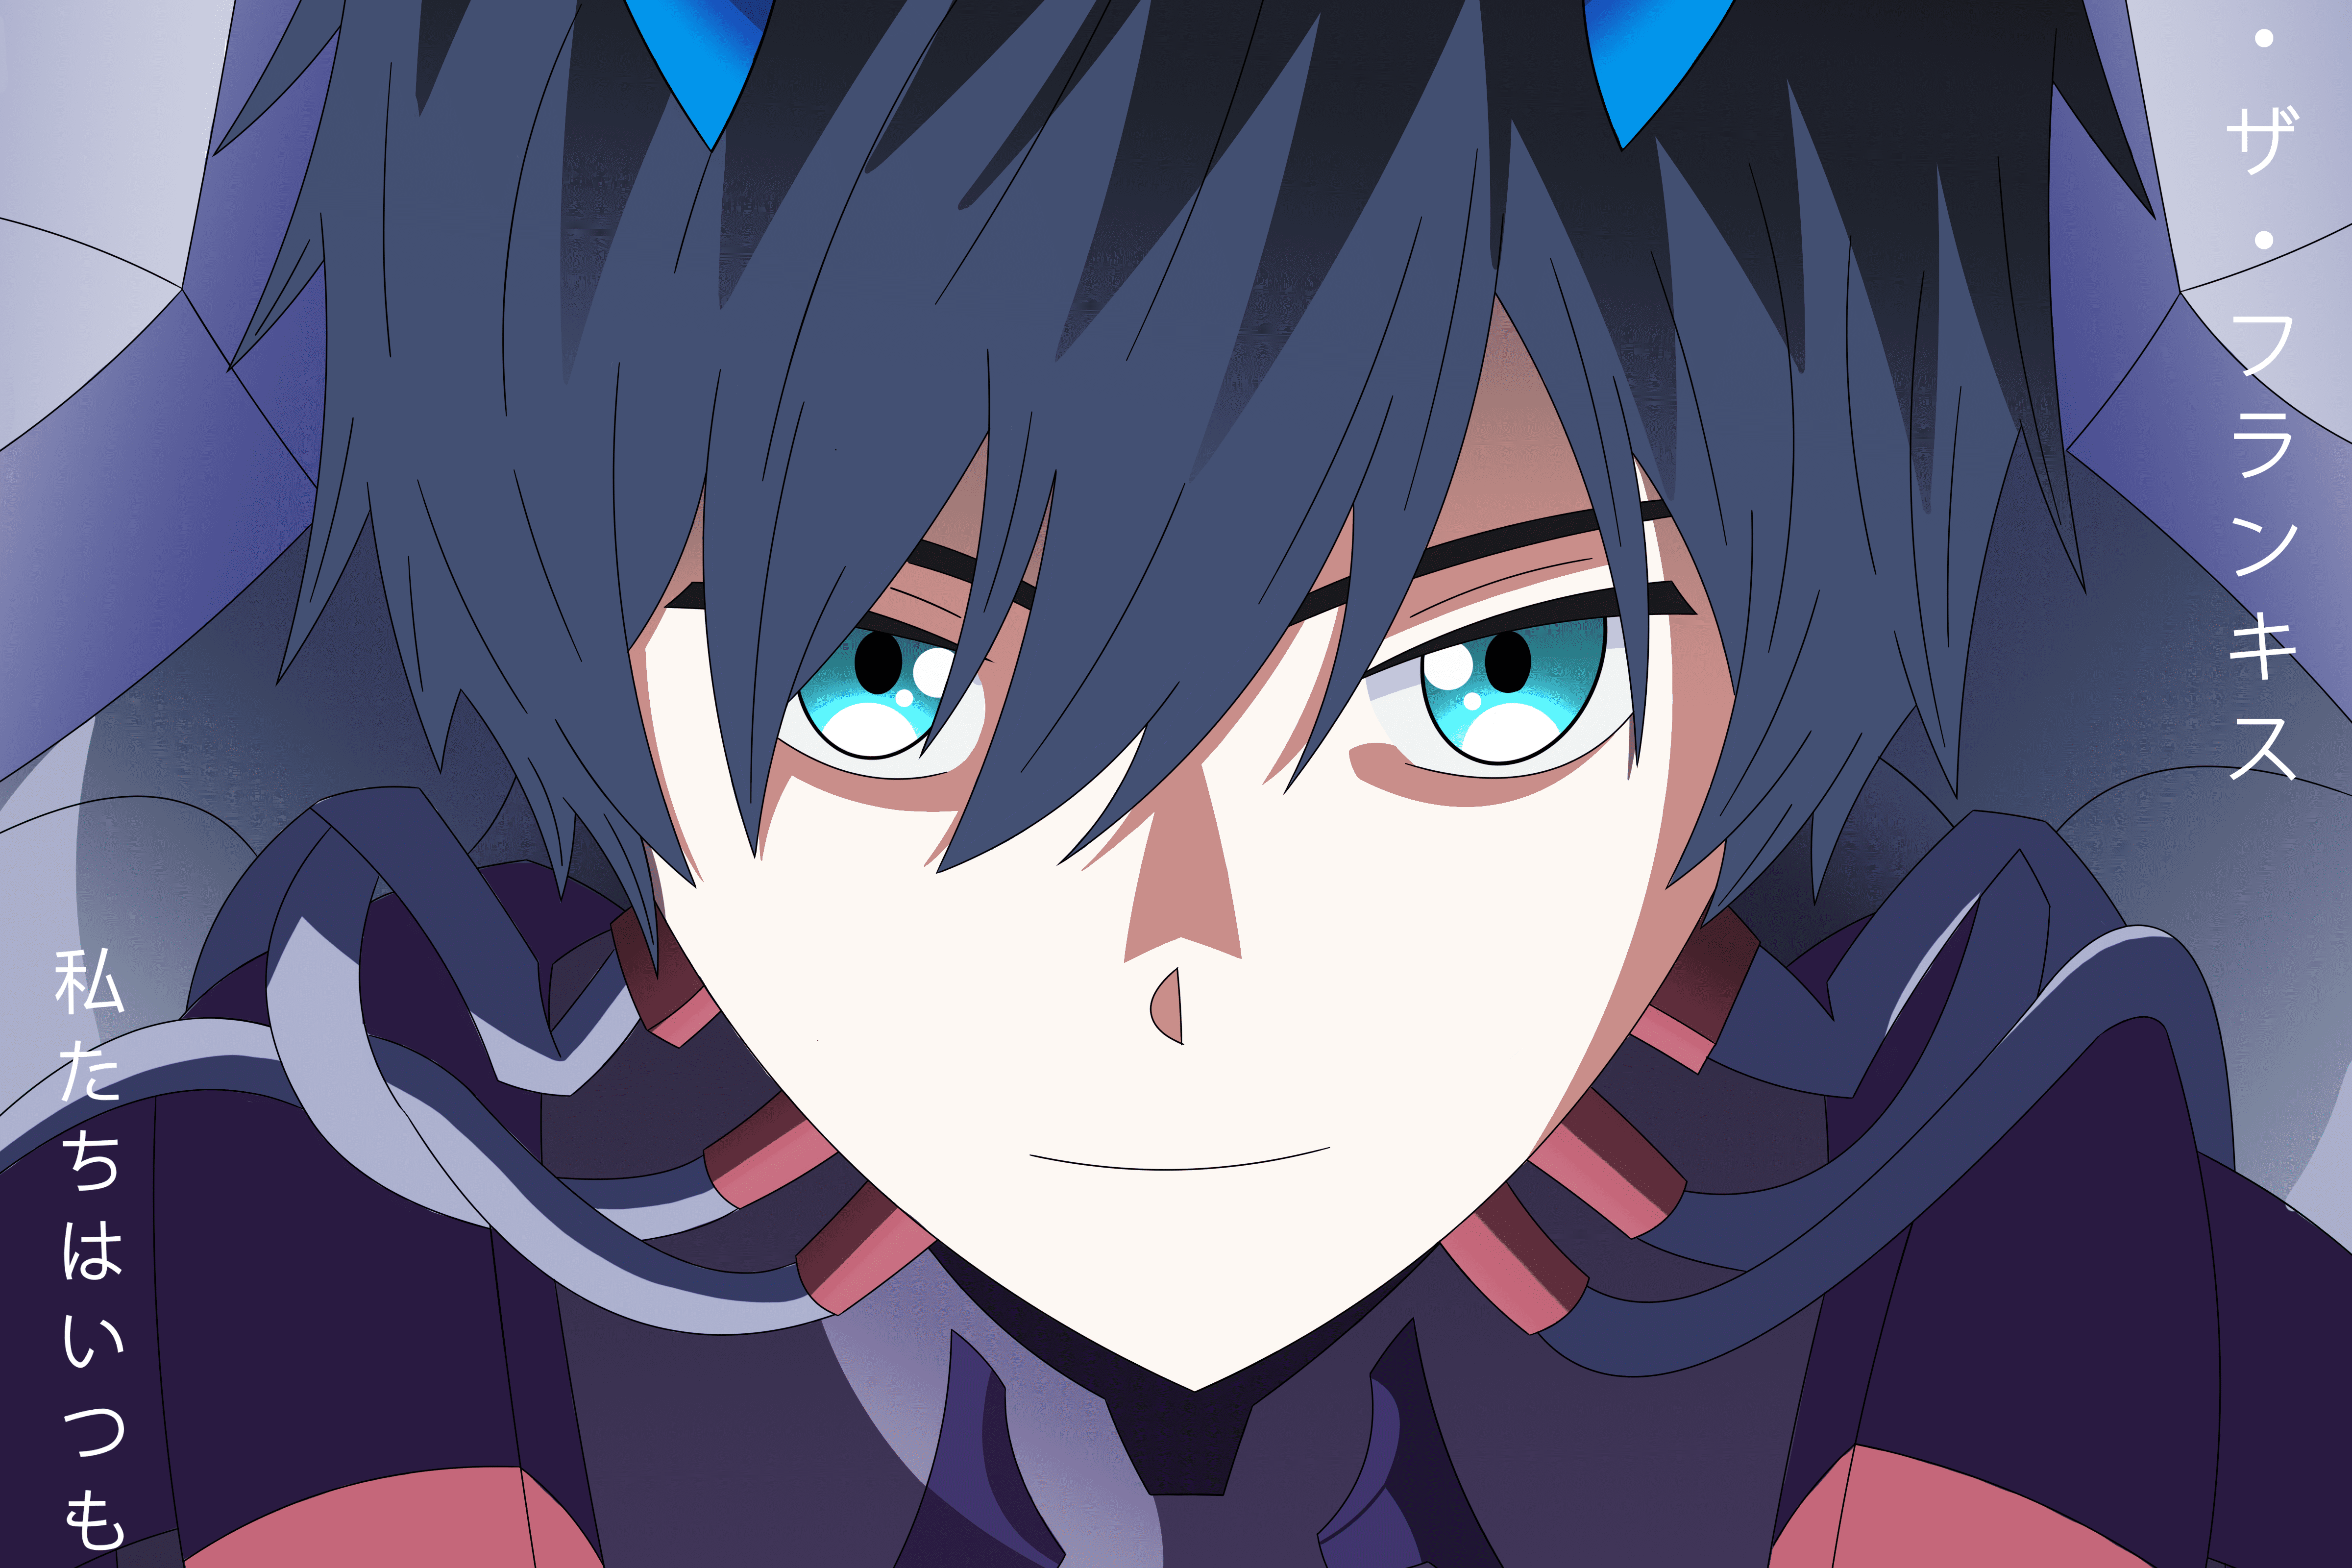 darling in the franxx hiro wallpapers wallpaper cave on darling in the franxx hiro wallpapers